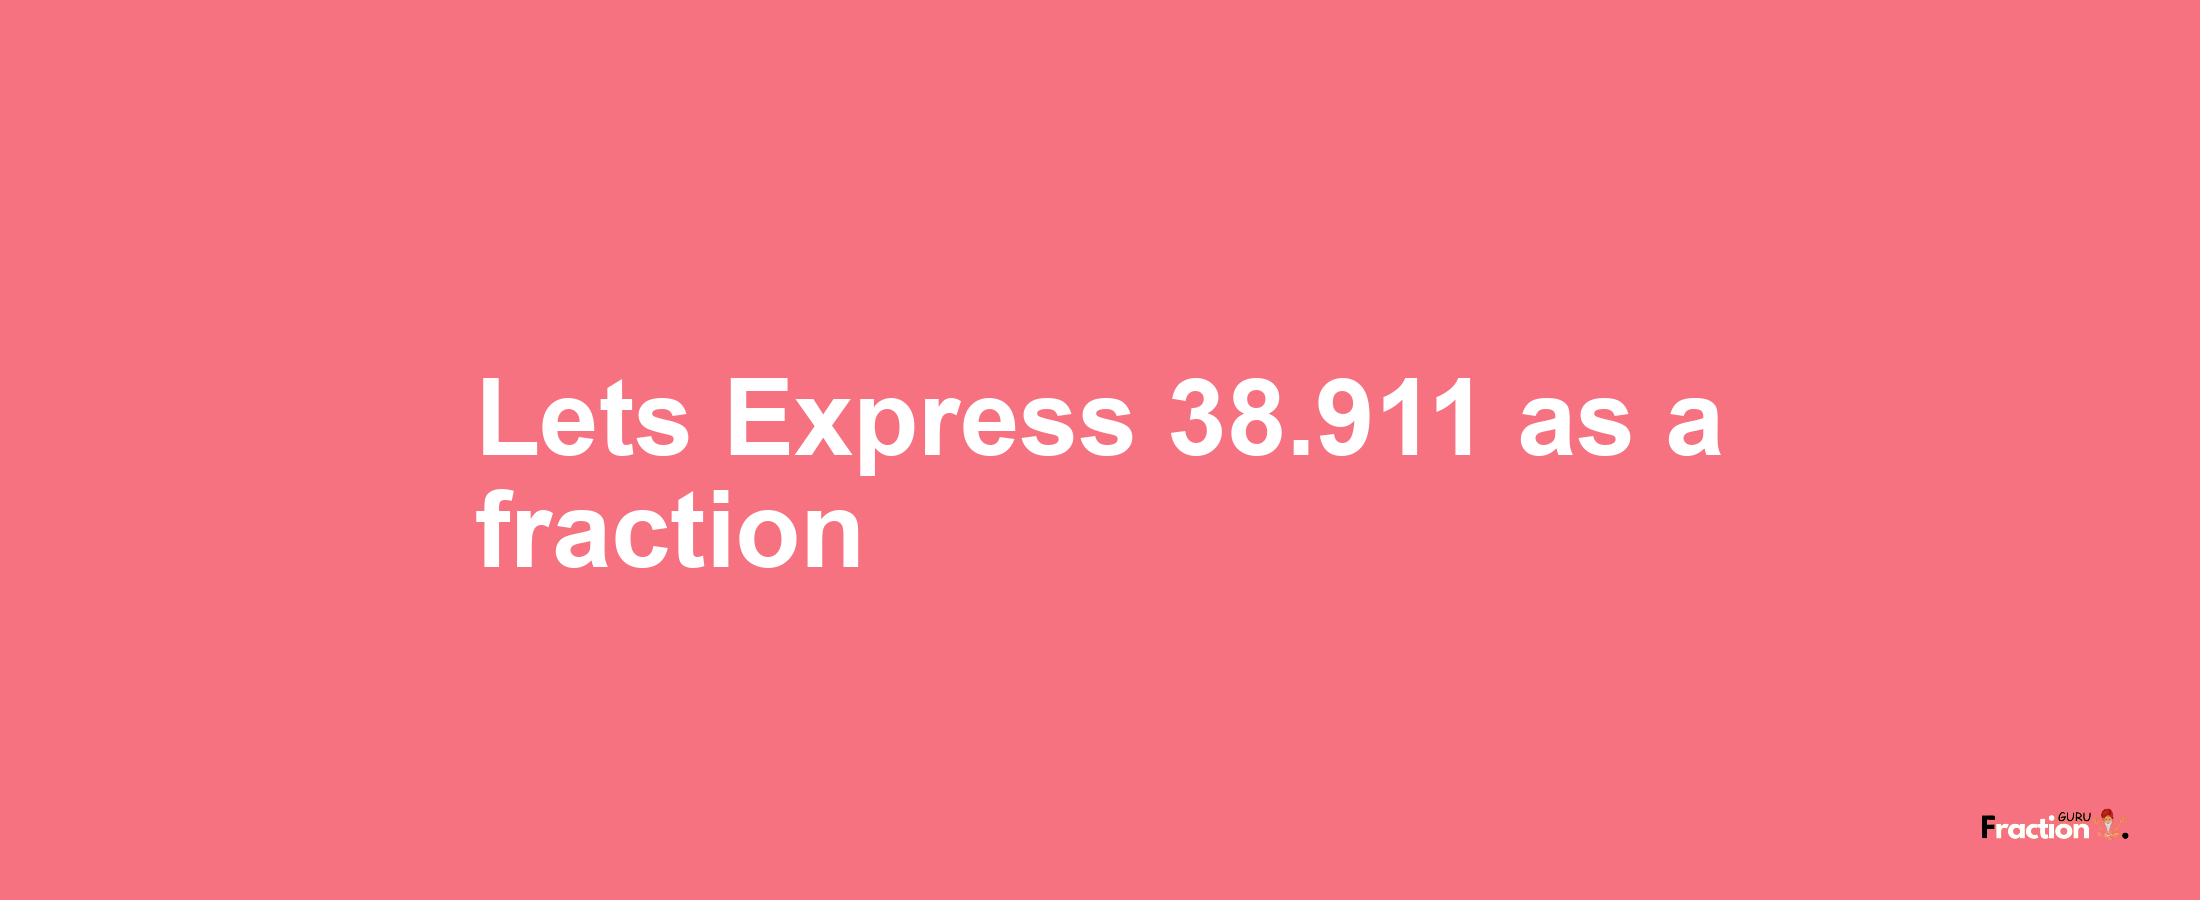 Lets Express 38.911 as afraction